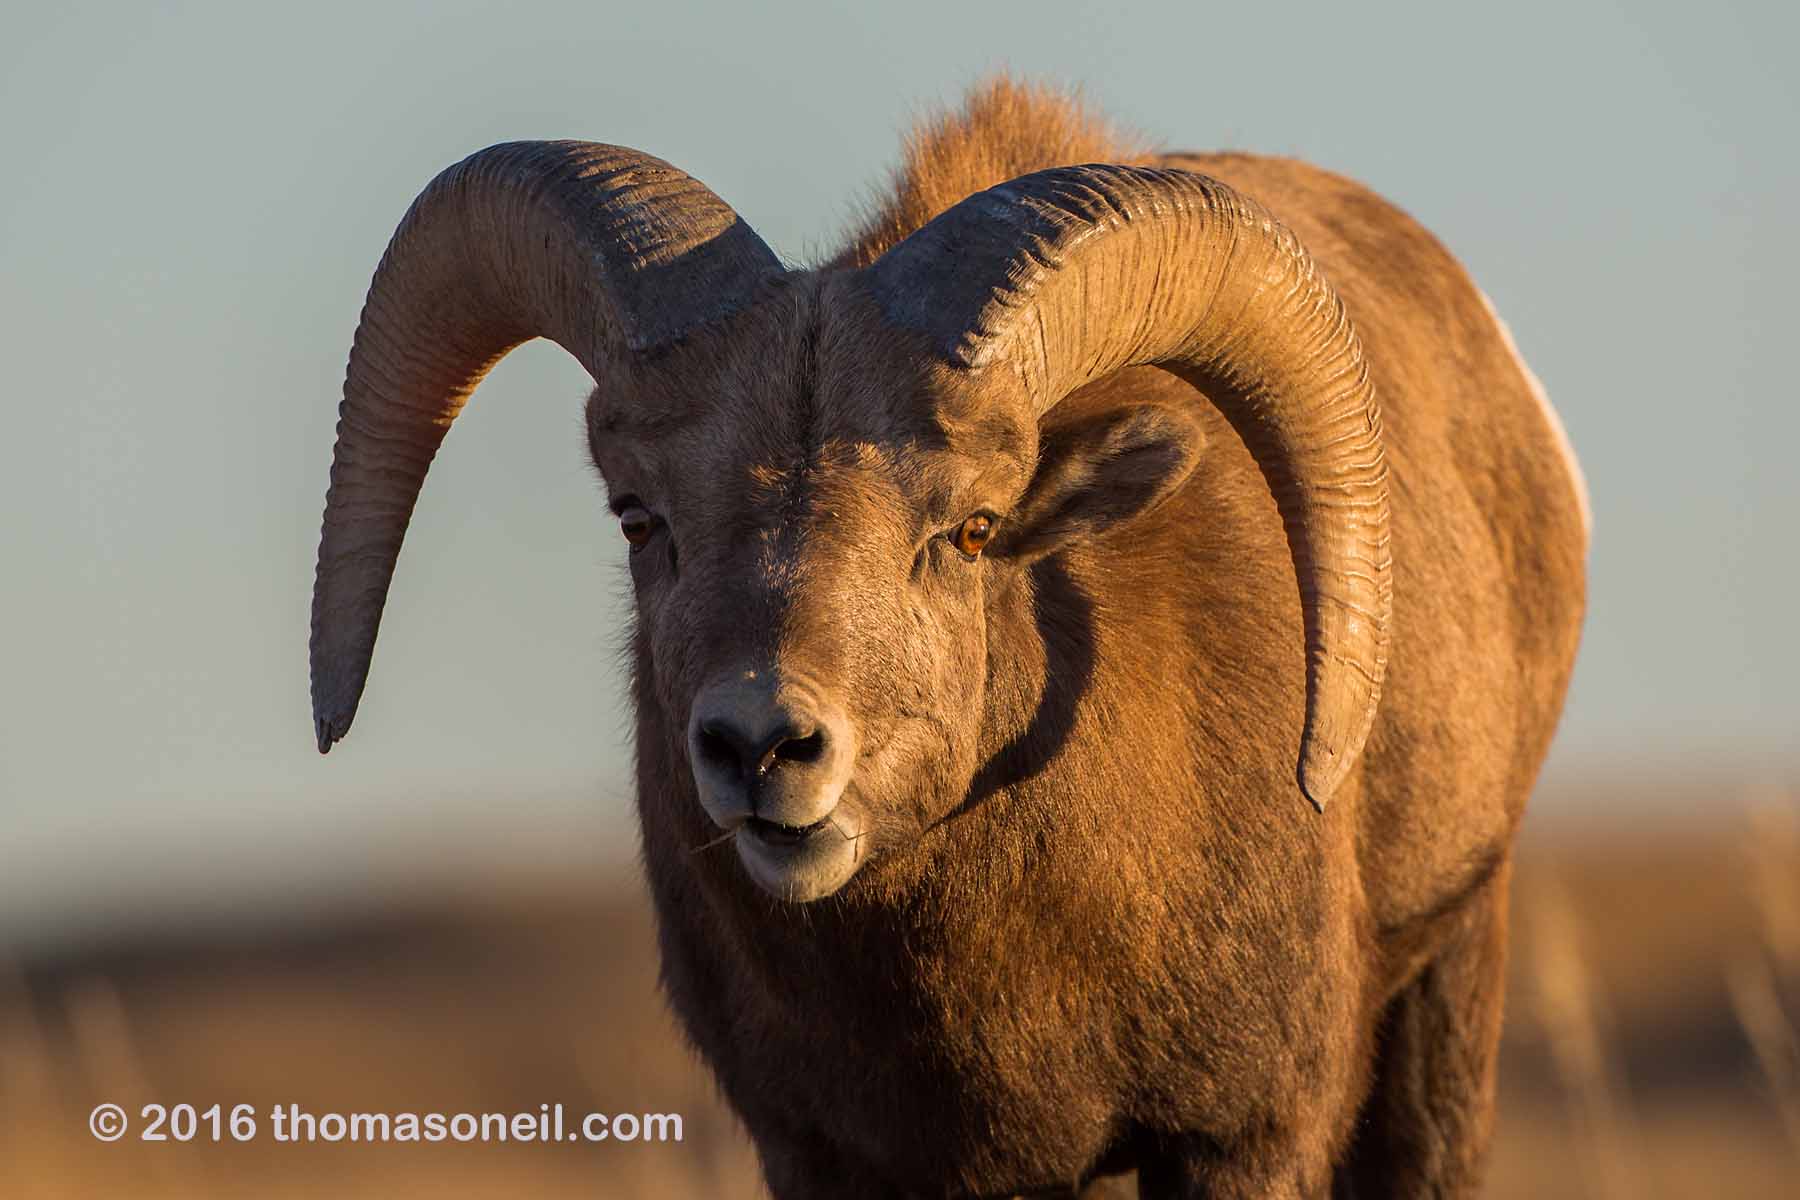 Bighorn with a wild look in his eye (see next image), Badlands National Park.  Click for next photo.